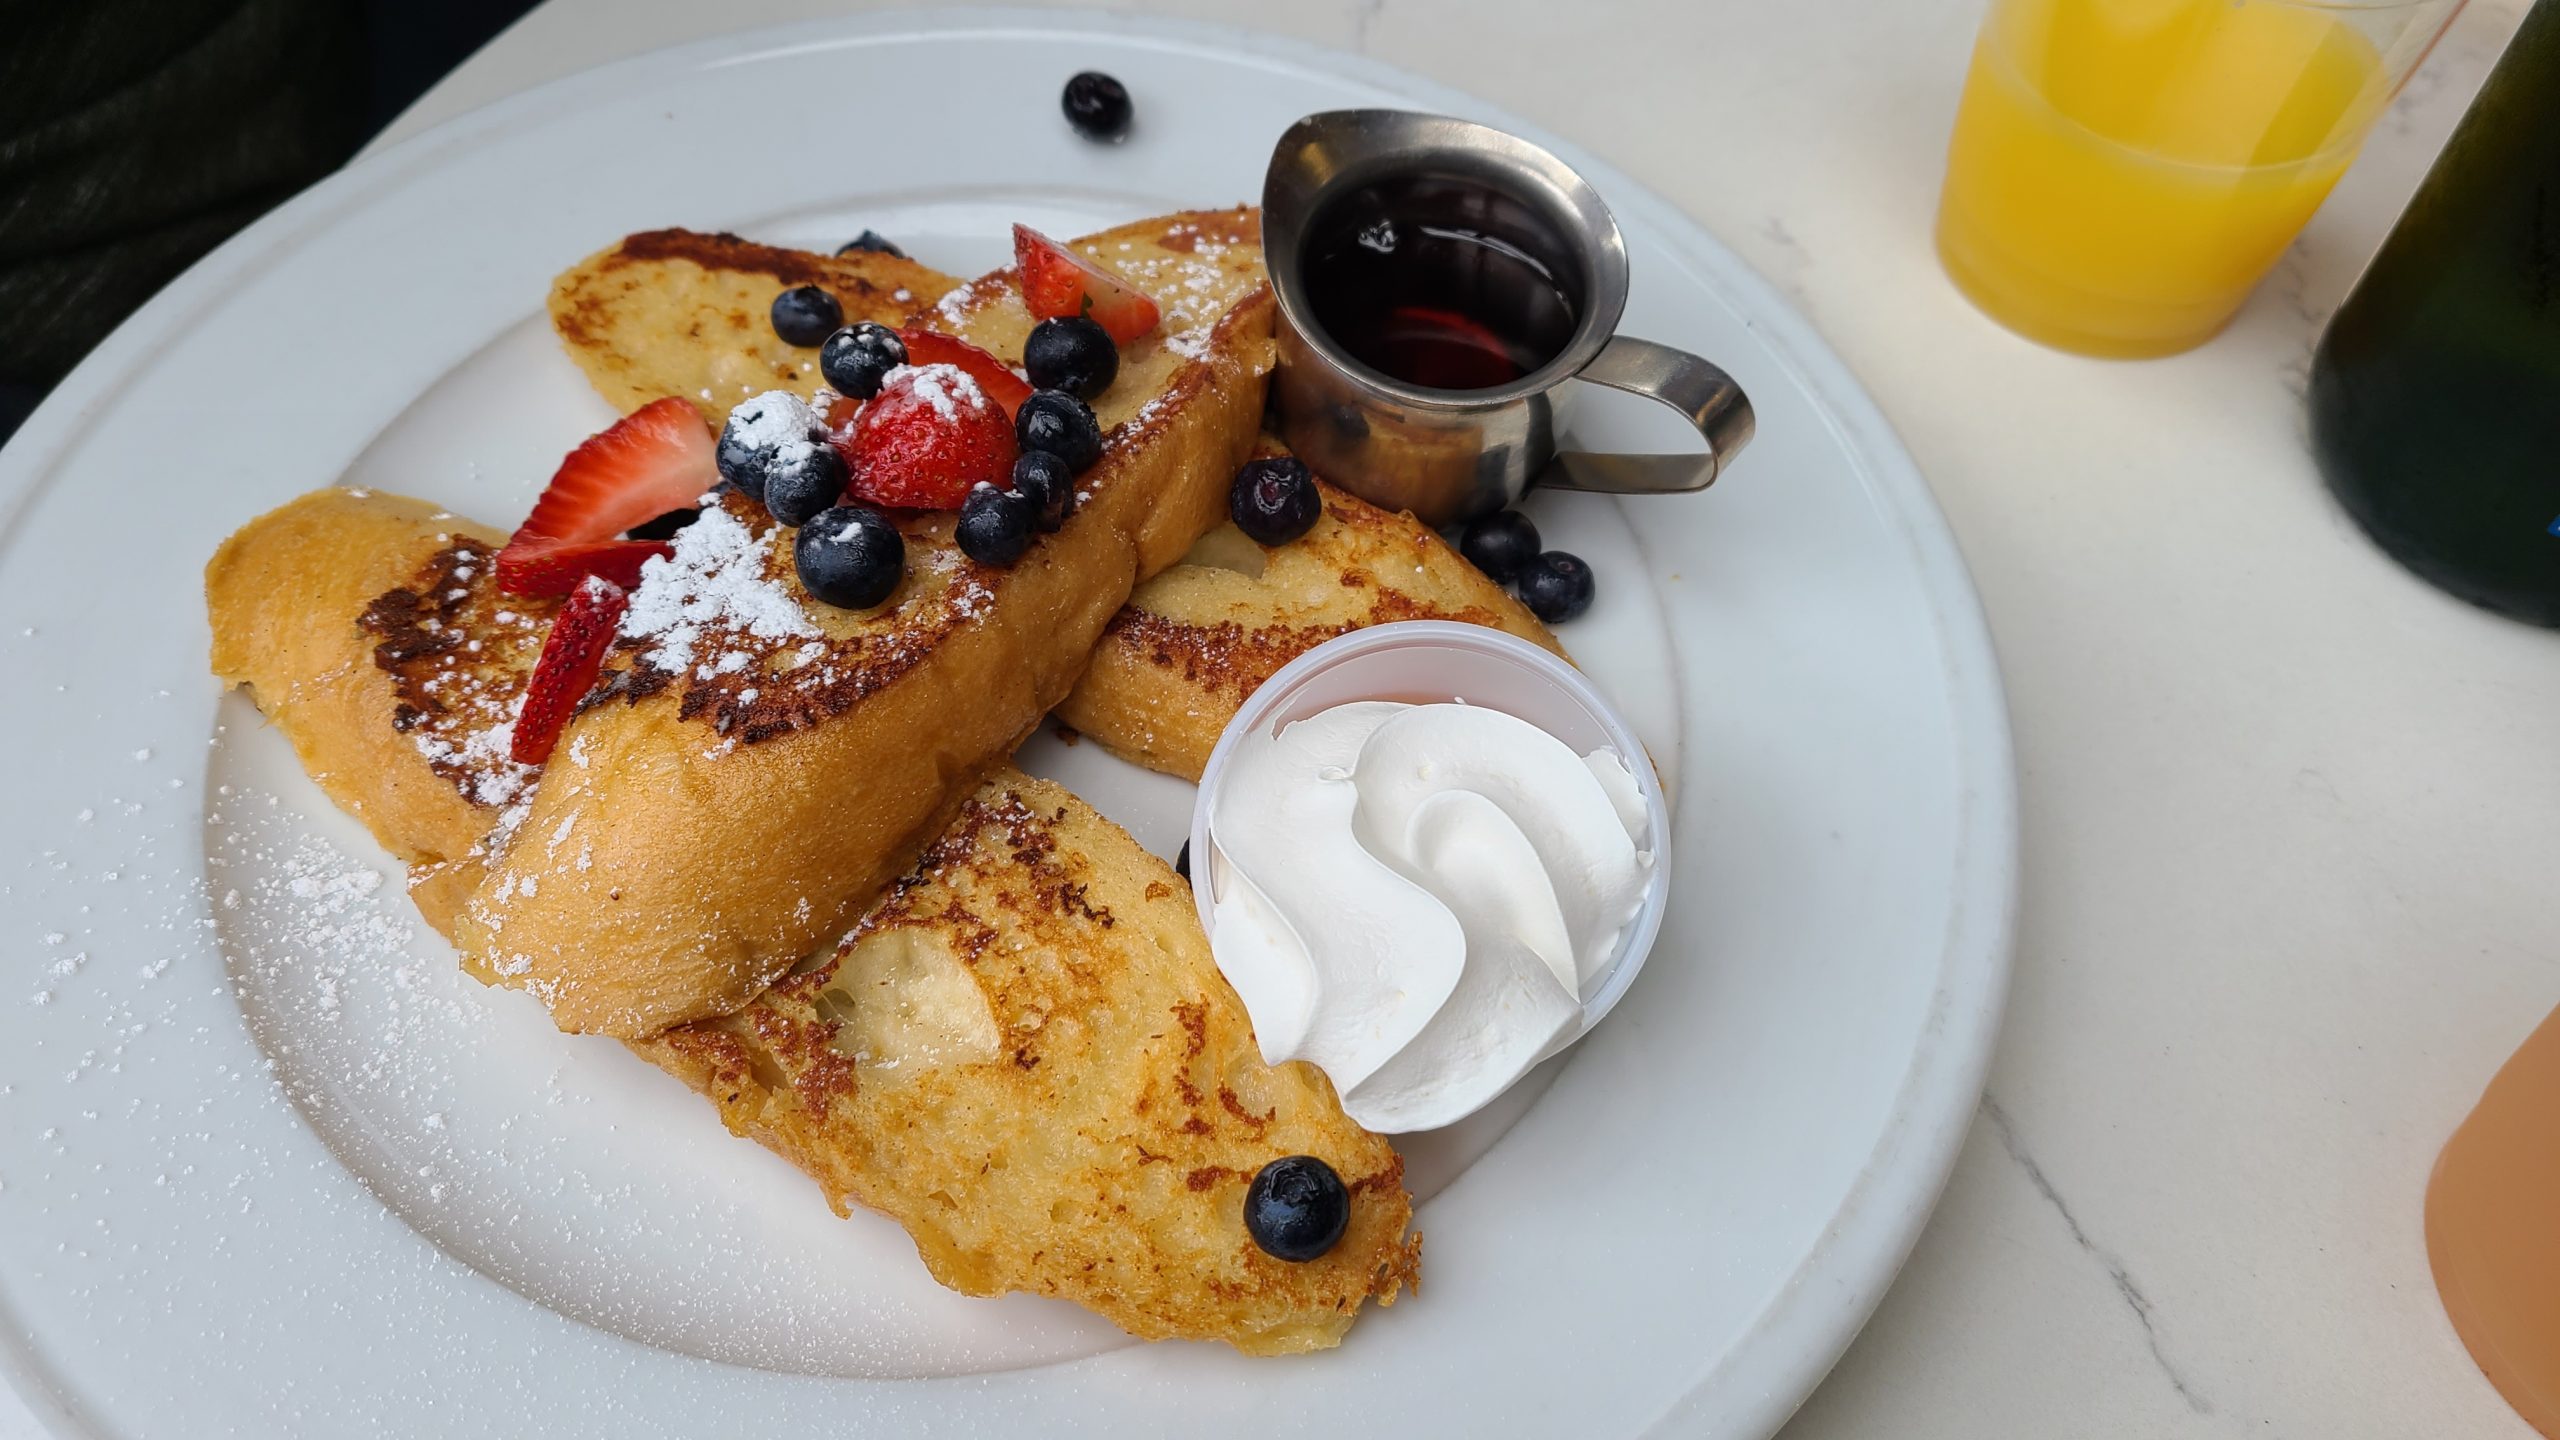 French Toast with berries, syrup, and whipped cream